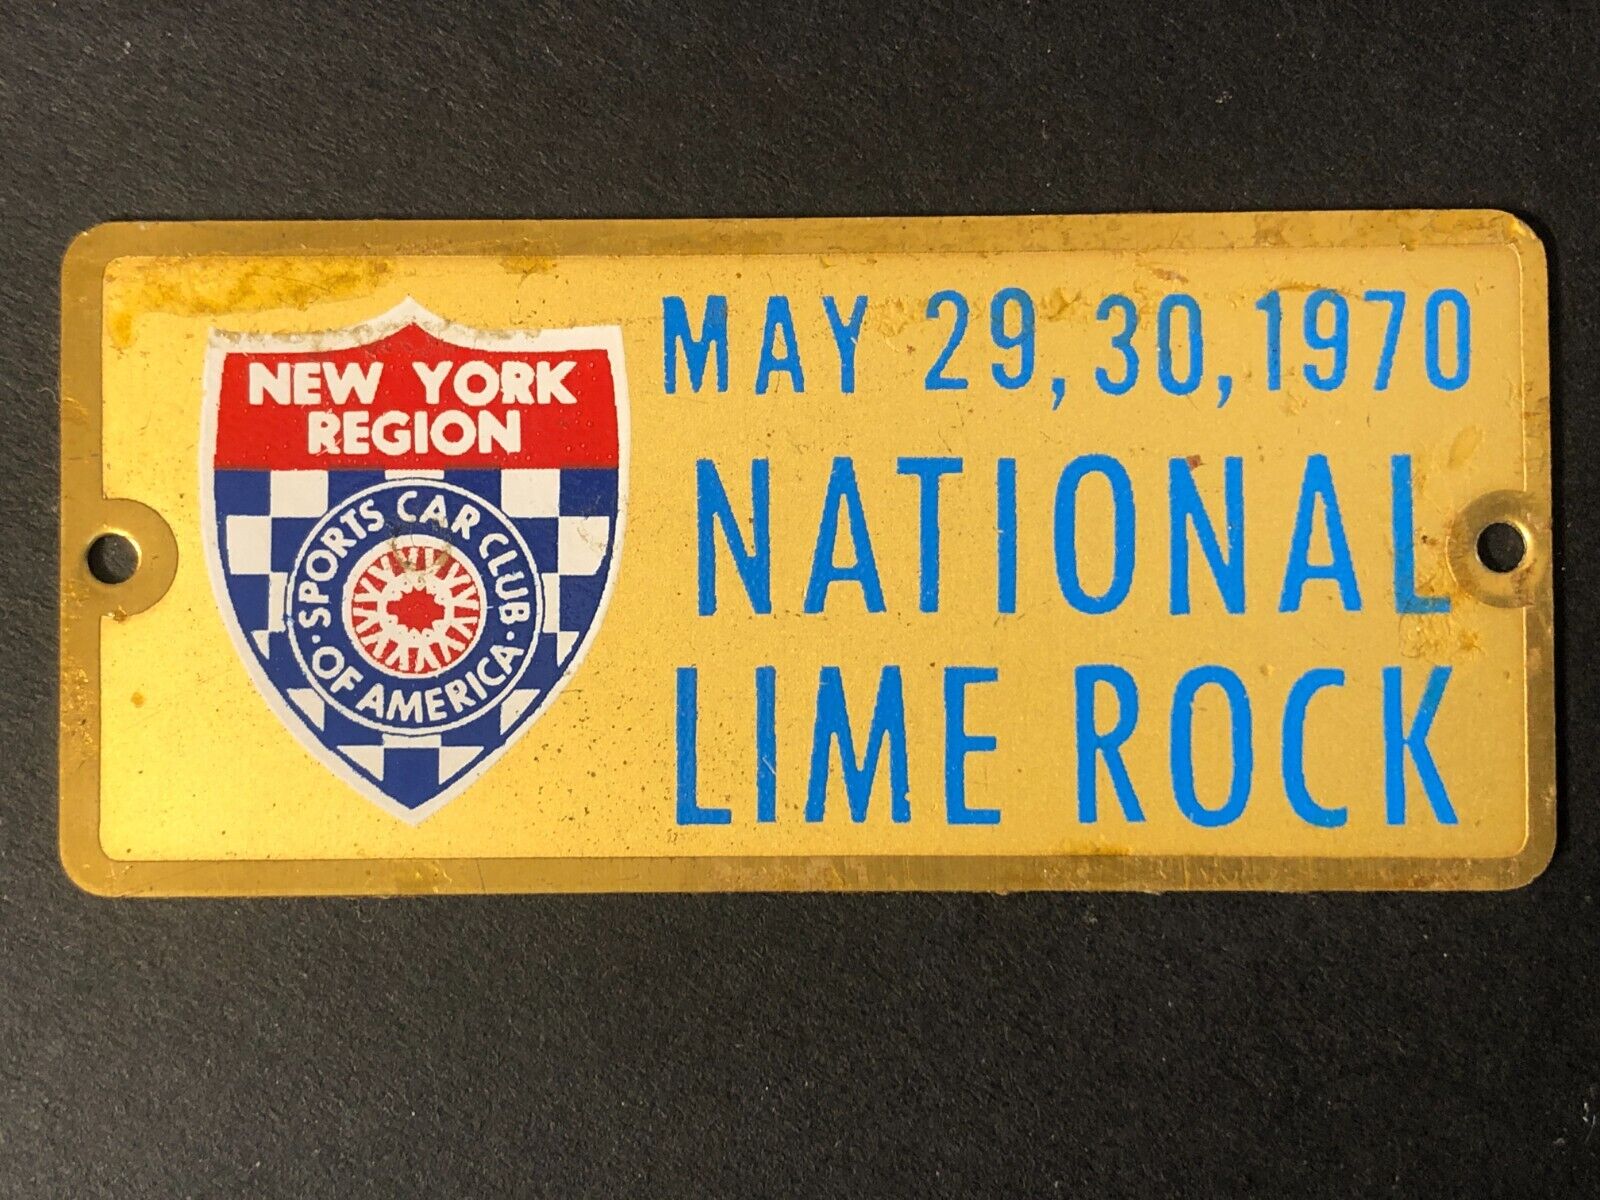 SCCA New York Region 1970 National Lime Rock Dash / Wall Plaque